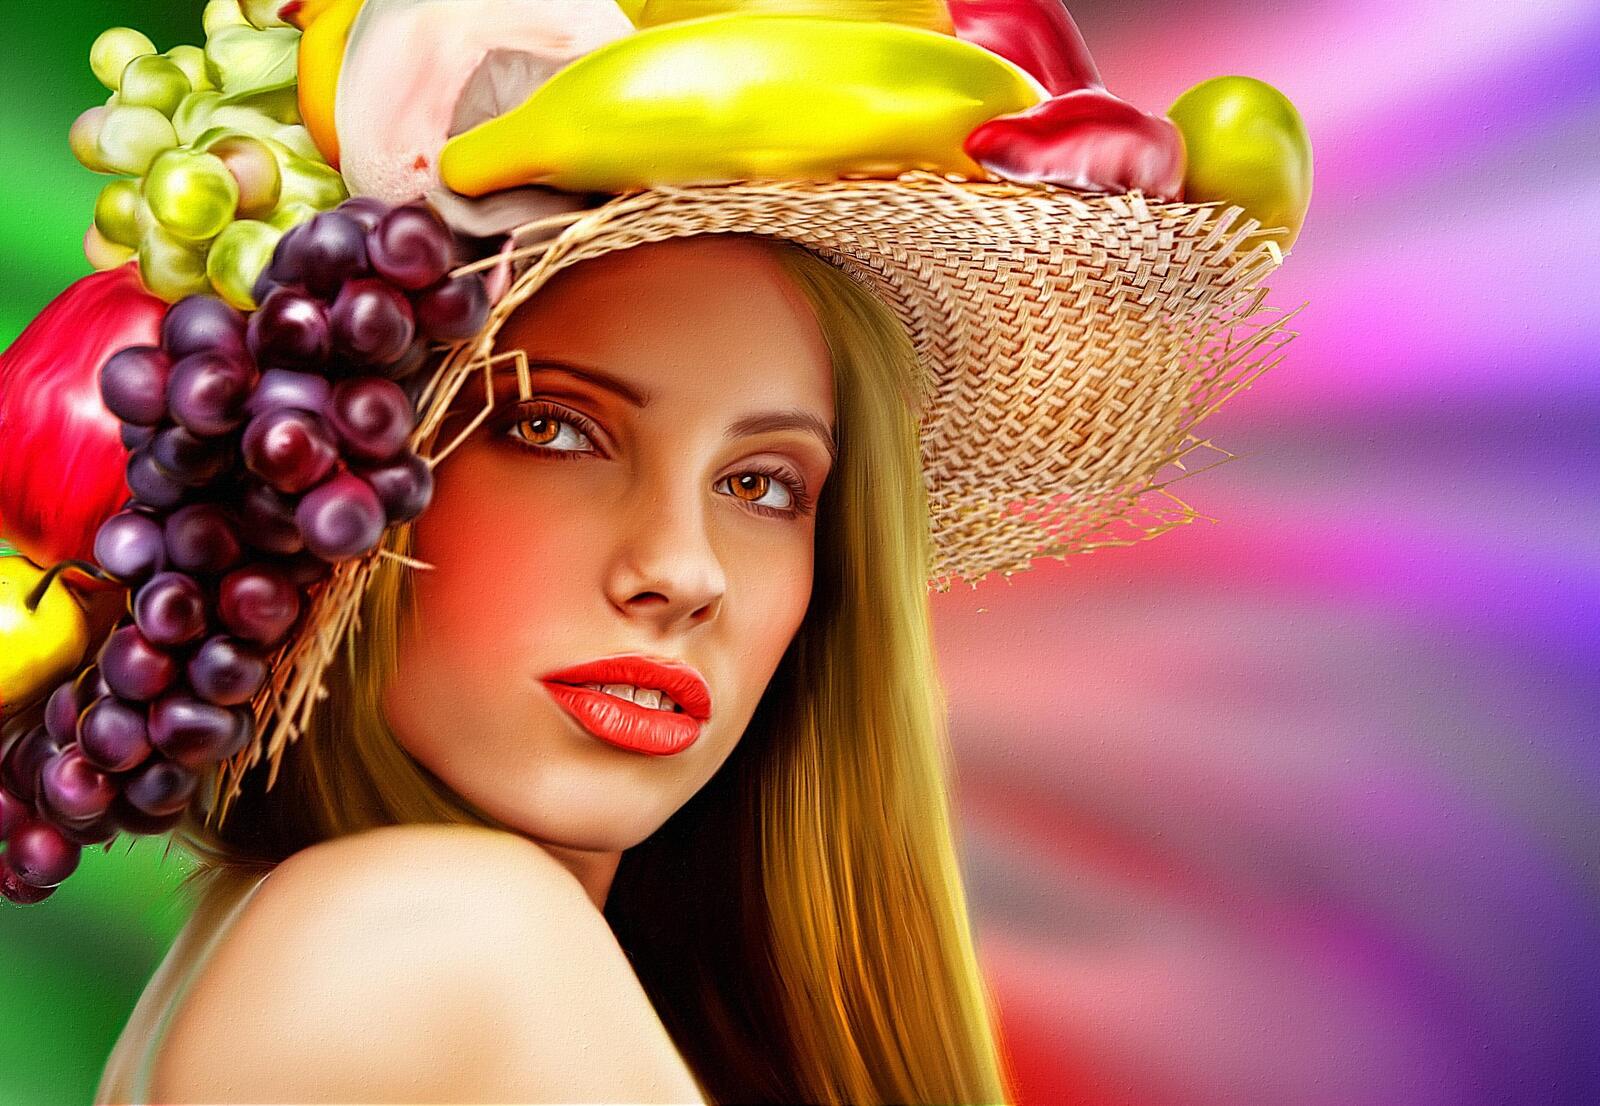 Wallpapers Girl with flowers and fruit portrait canvas on the desktop